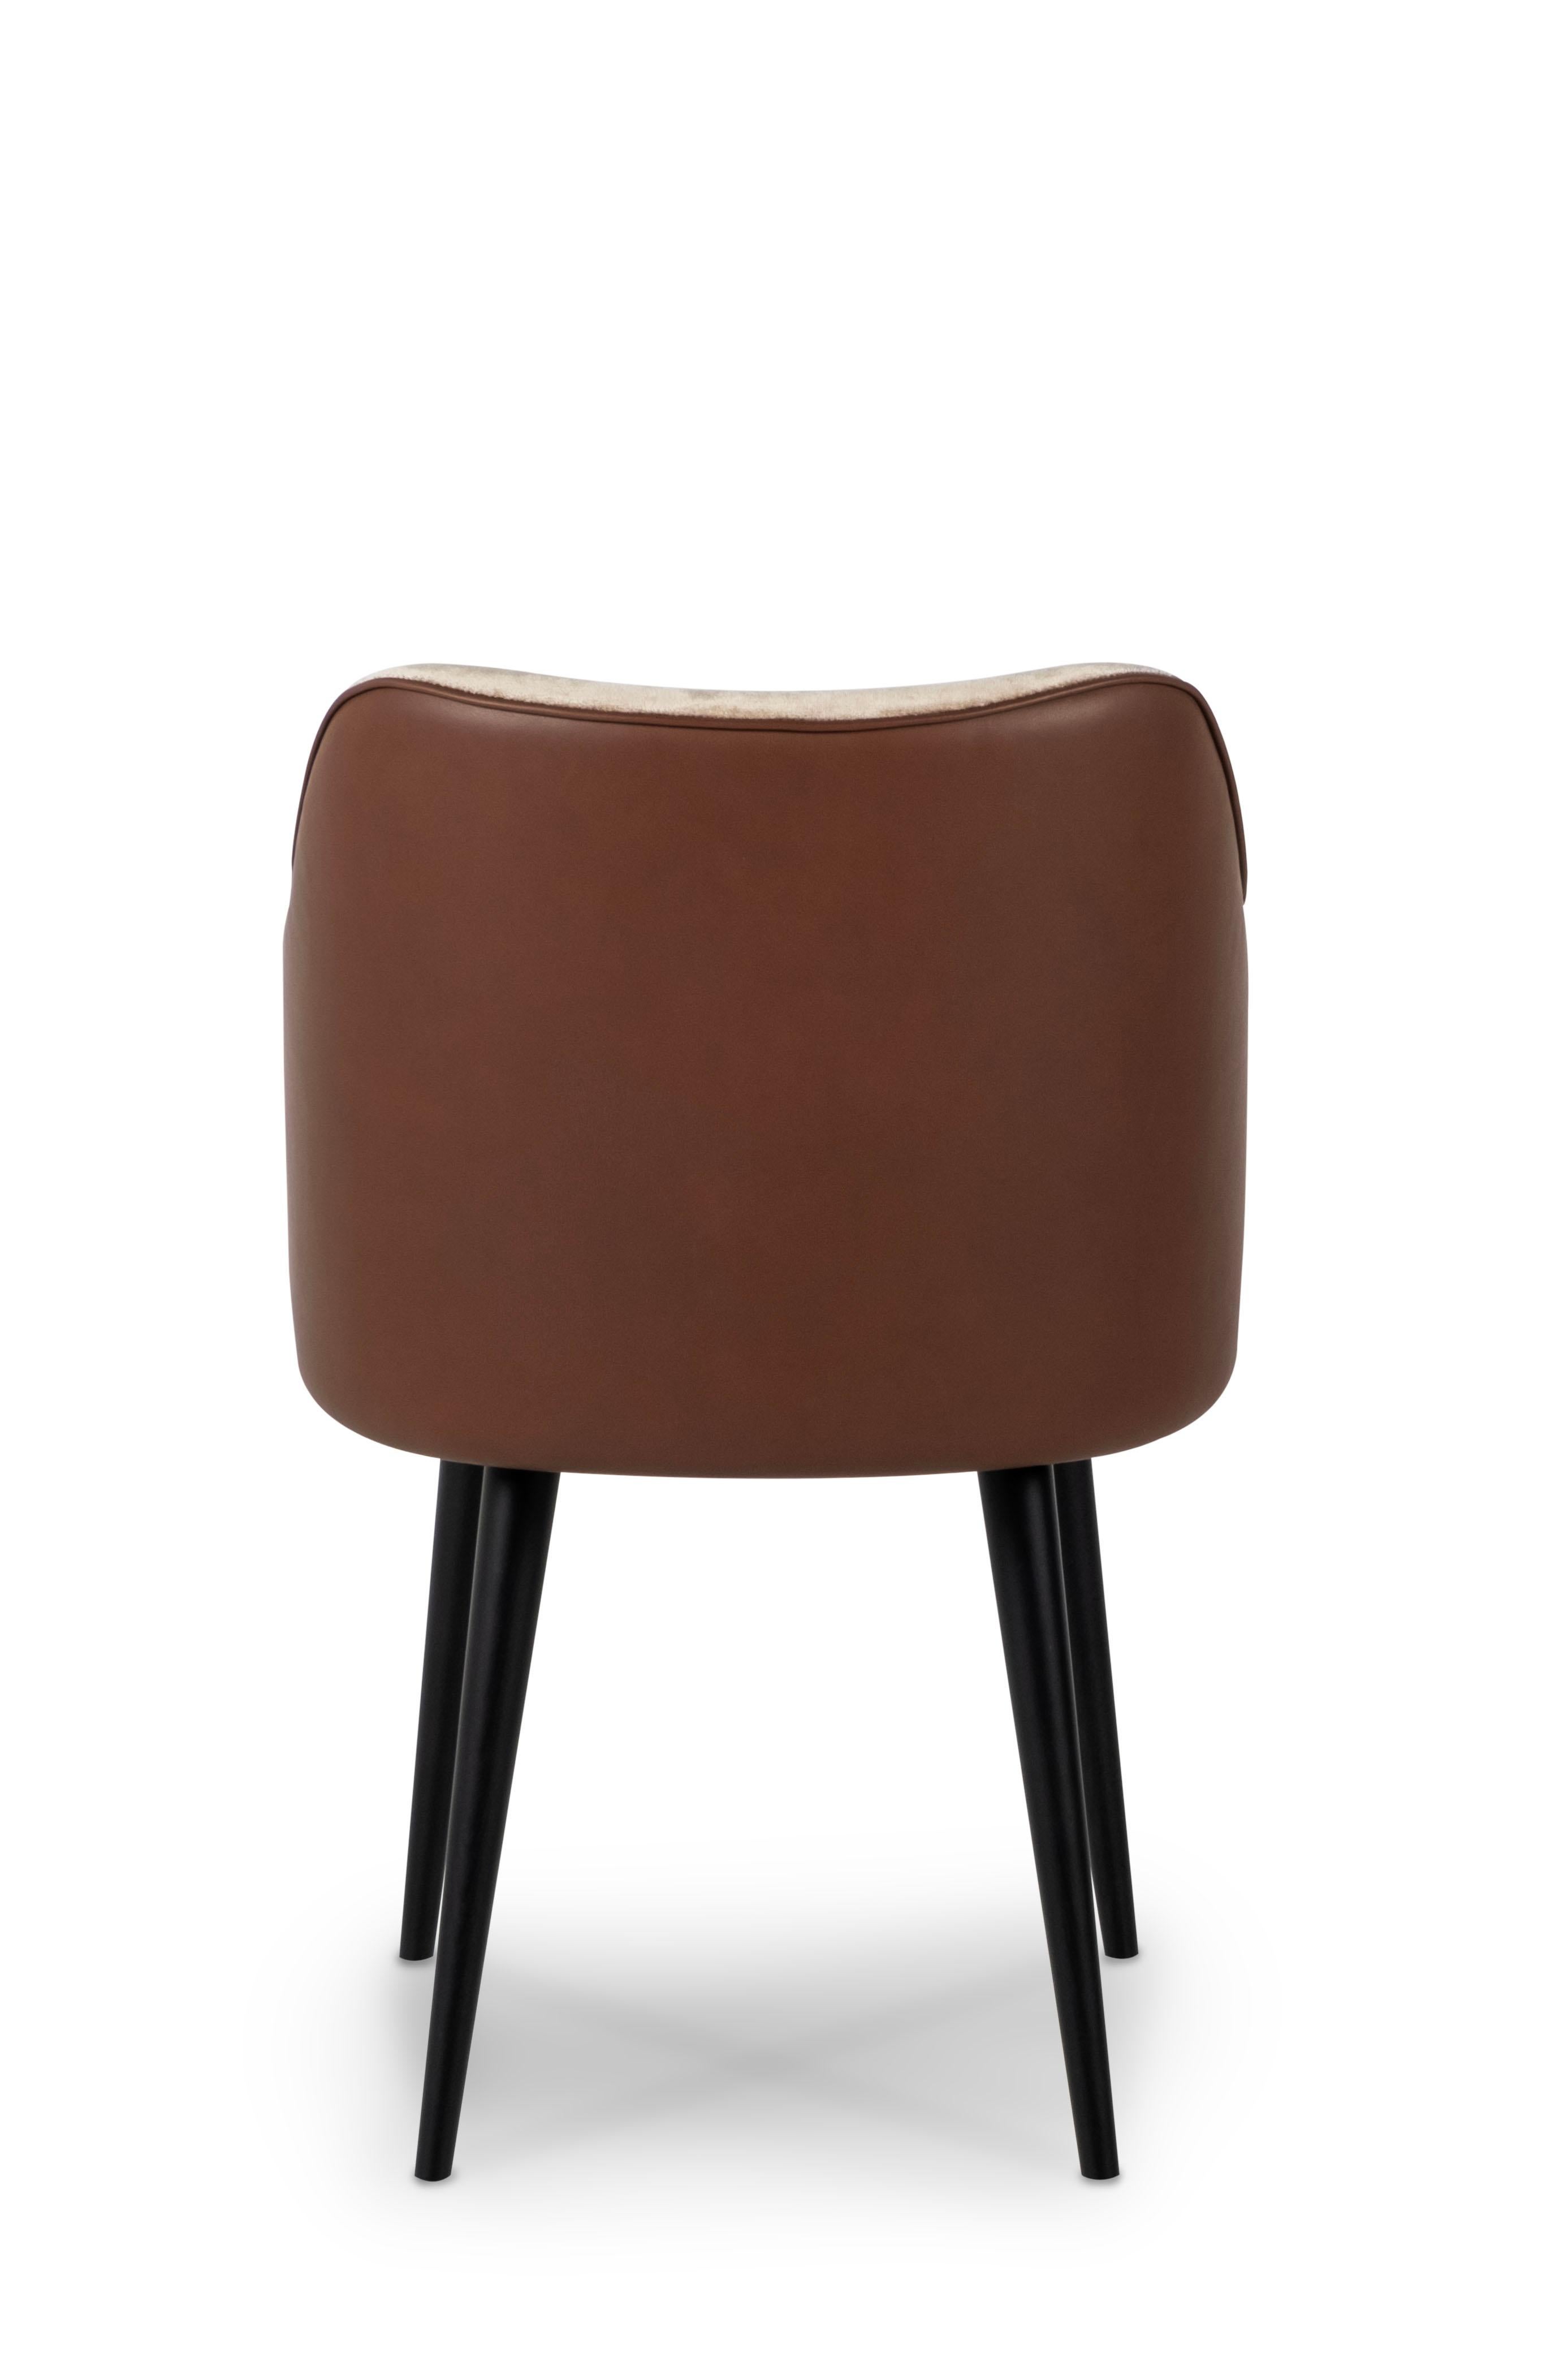 Portuguese Modern Margot Dining Chair, Brown Leather Camel, Handmade Portugal by Greenapple For Sale